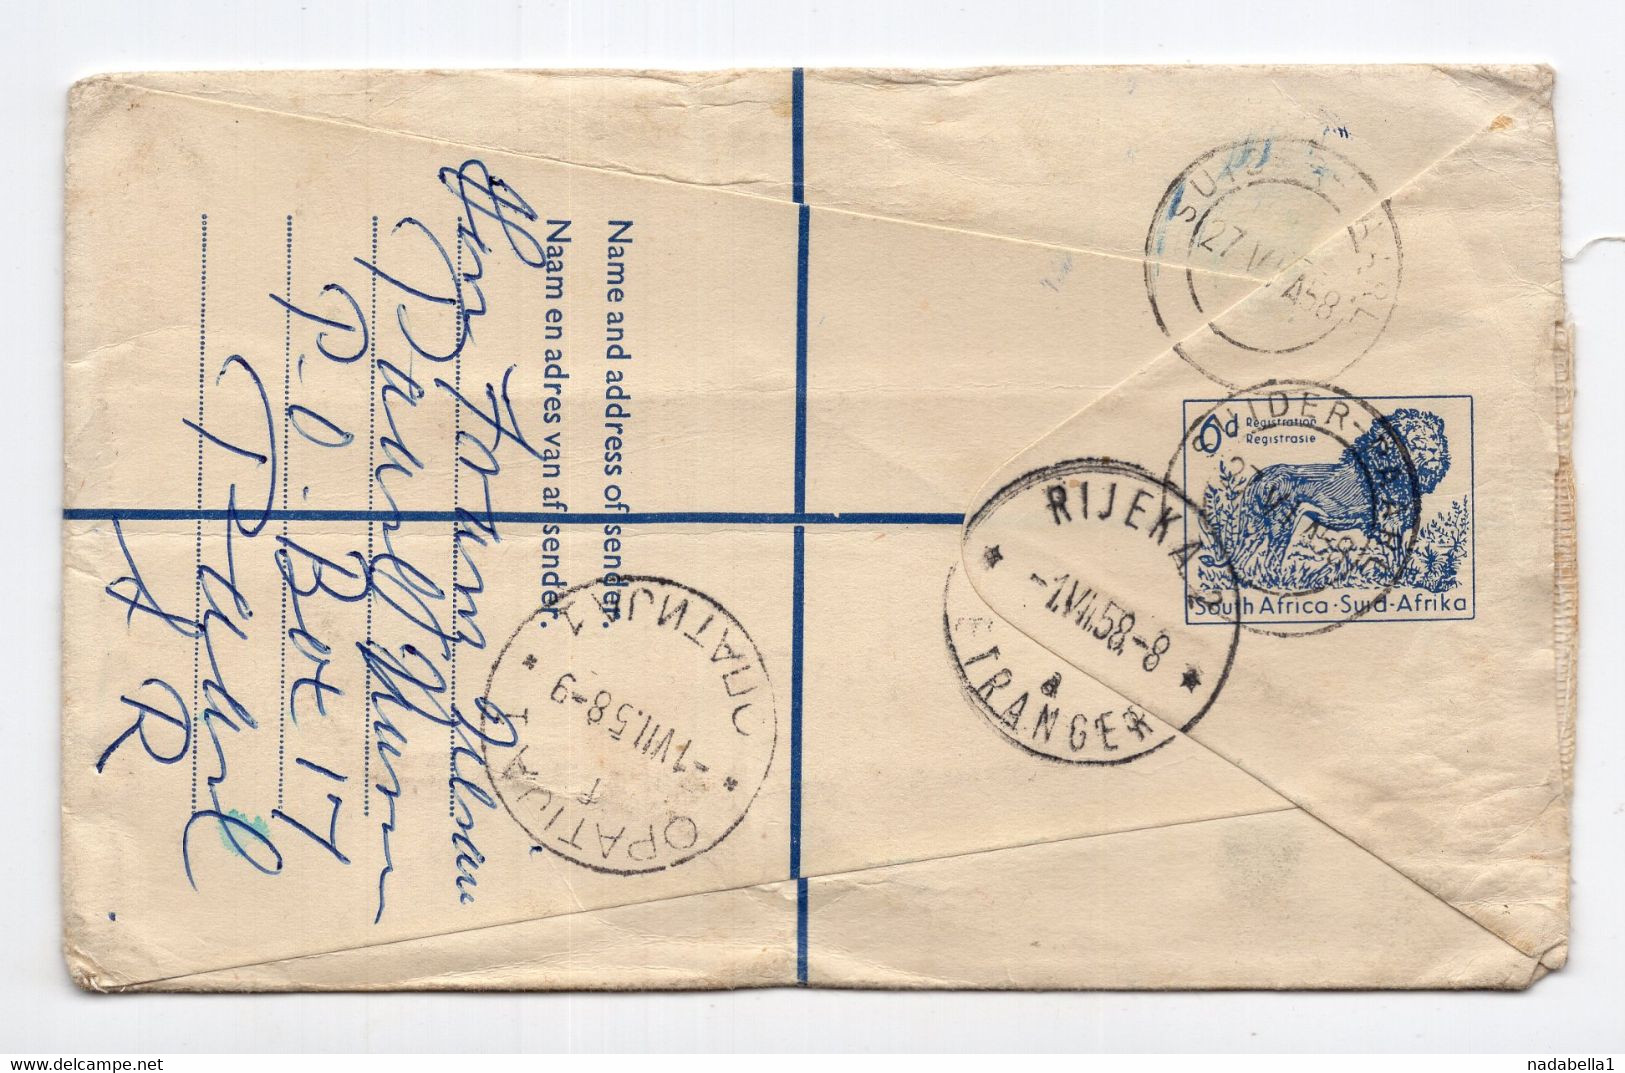 1958. SOUTH AFRICA,SUIDER-PAARL TO YUGOSLAVIA,REGISTERED AIRMAIL COVER TO OPATIJA,CROATIA - Luftpost